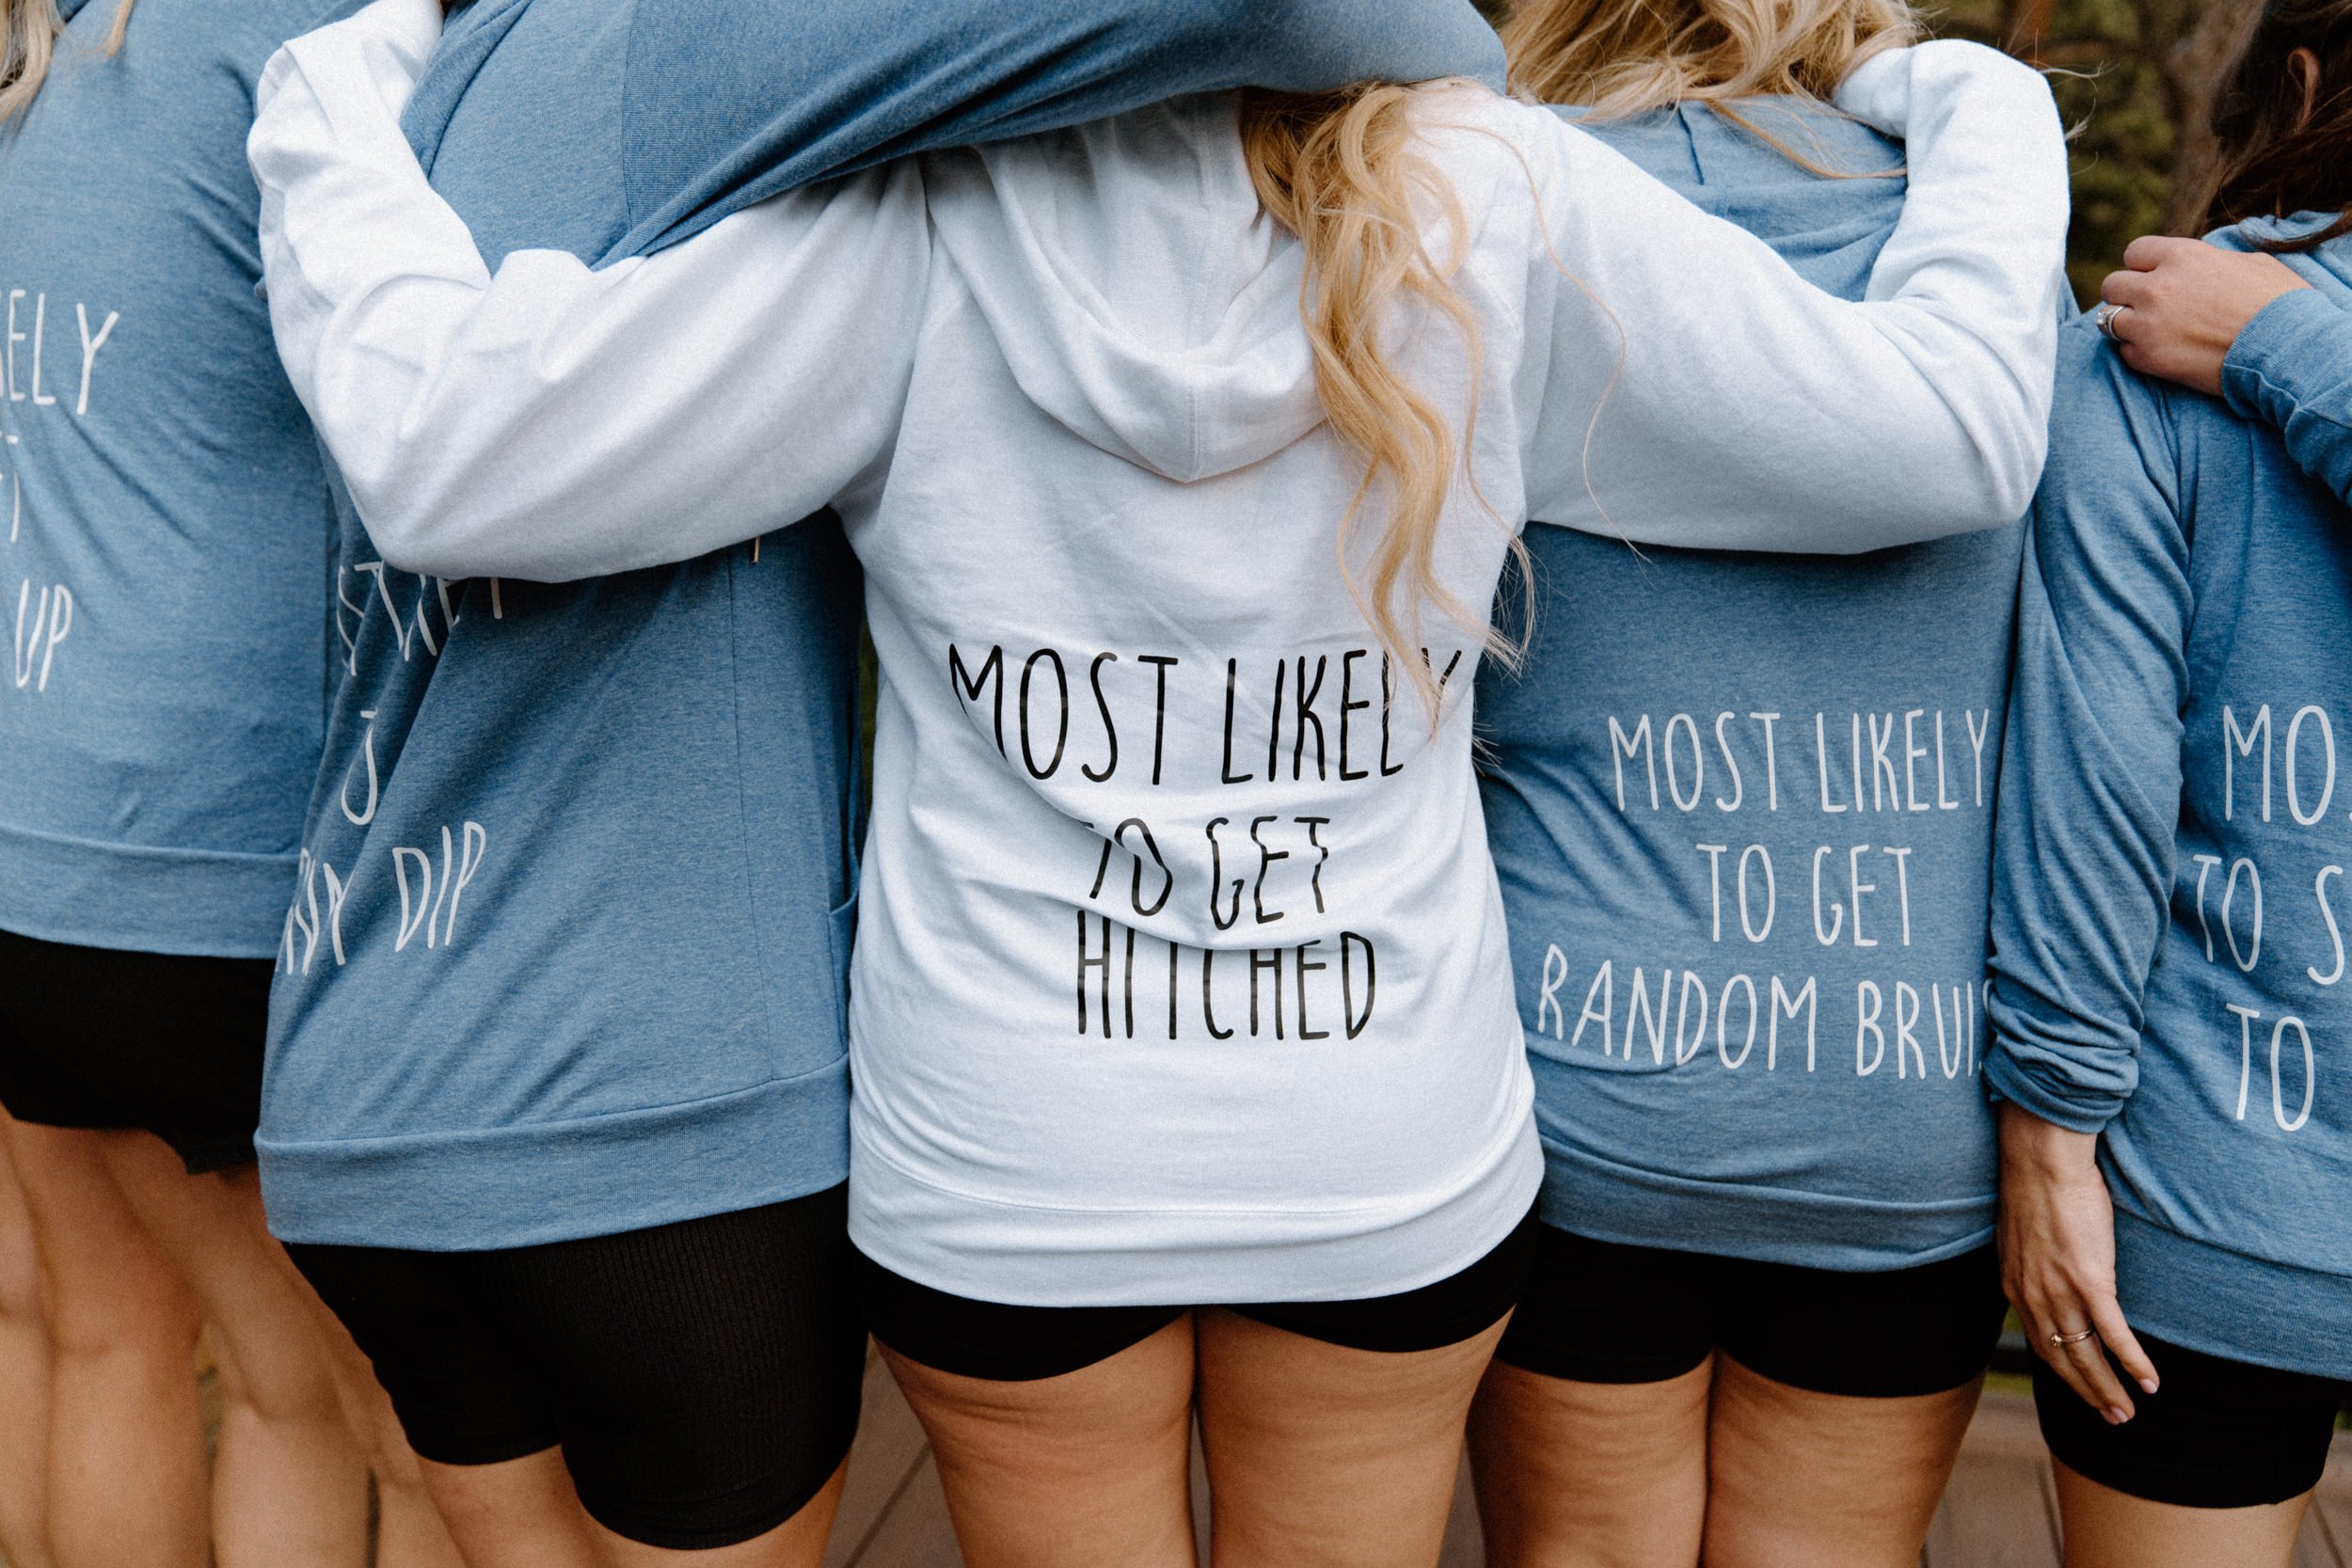 The bridal party turns the other way to show off their customized "Most Likely" jackets